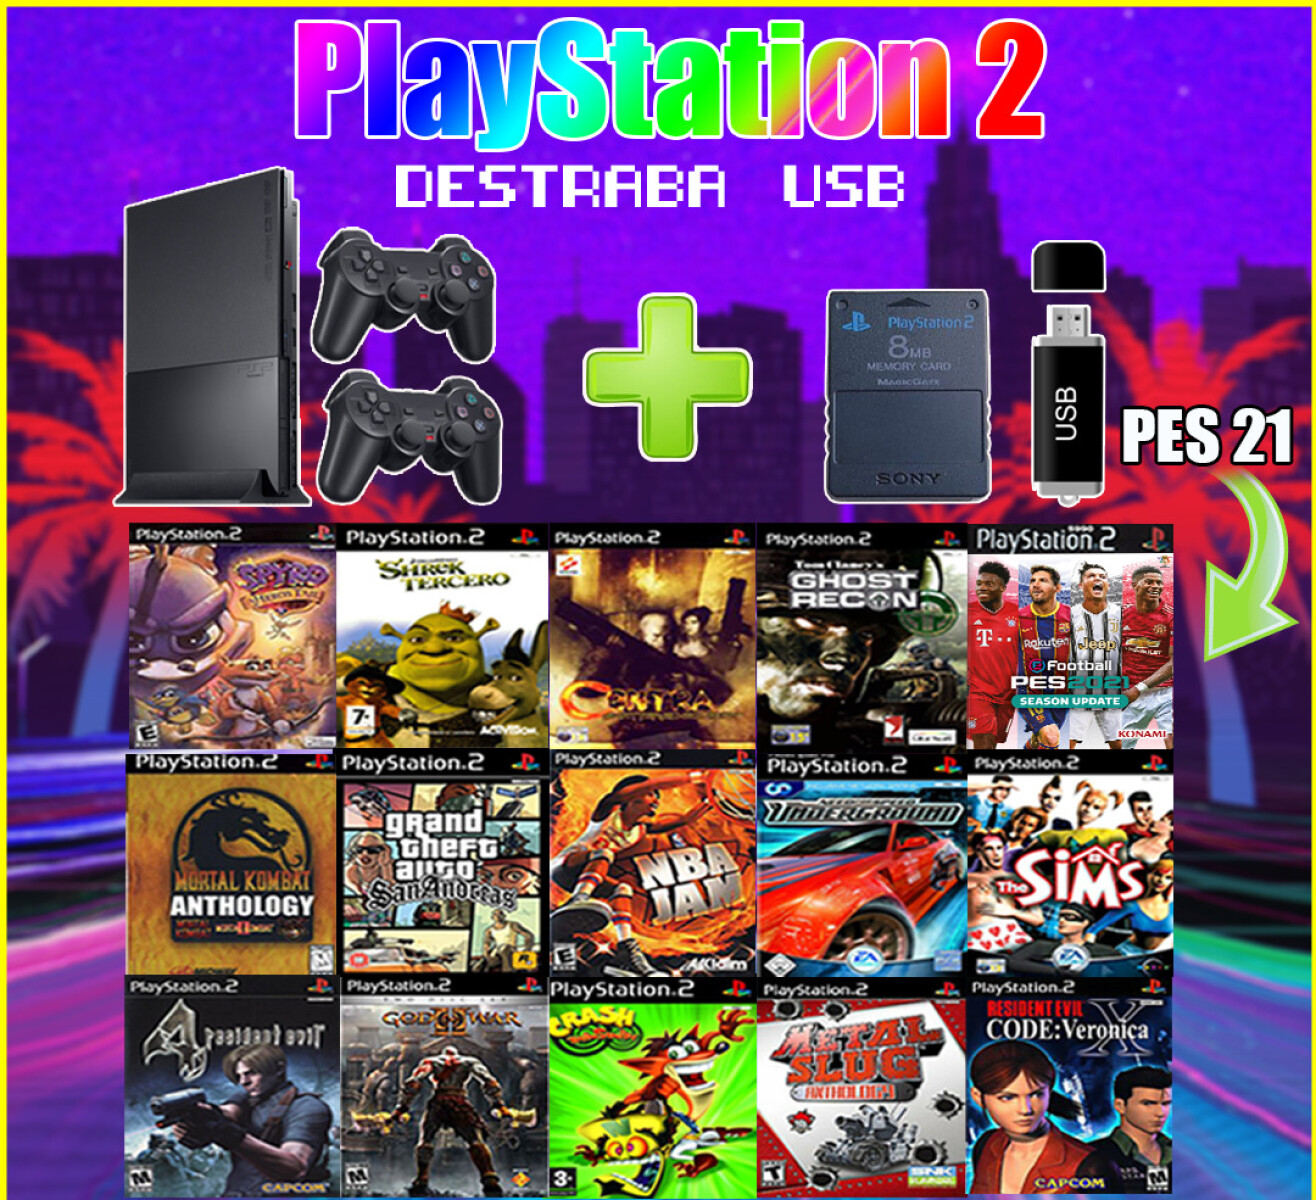 PS2 PLAY 2 USB Pack 1 